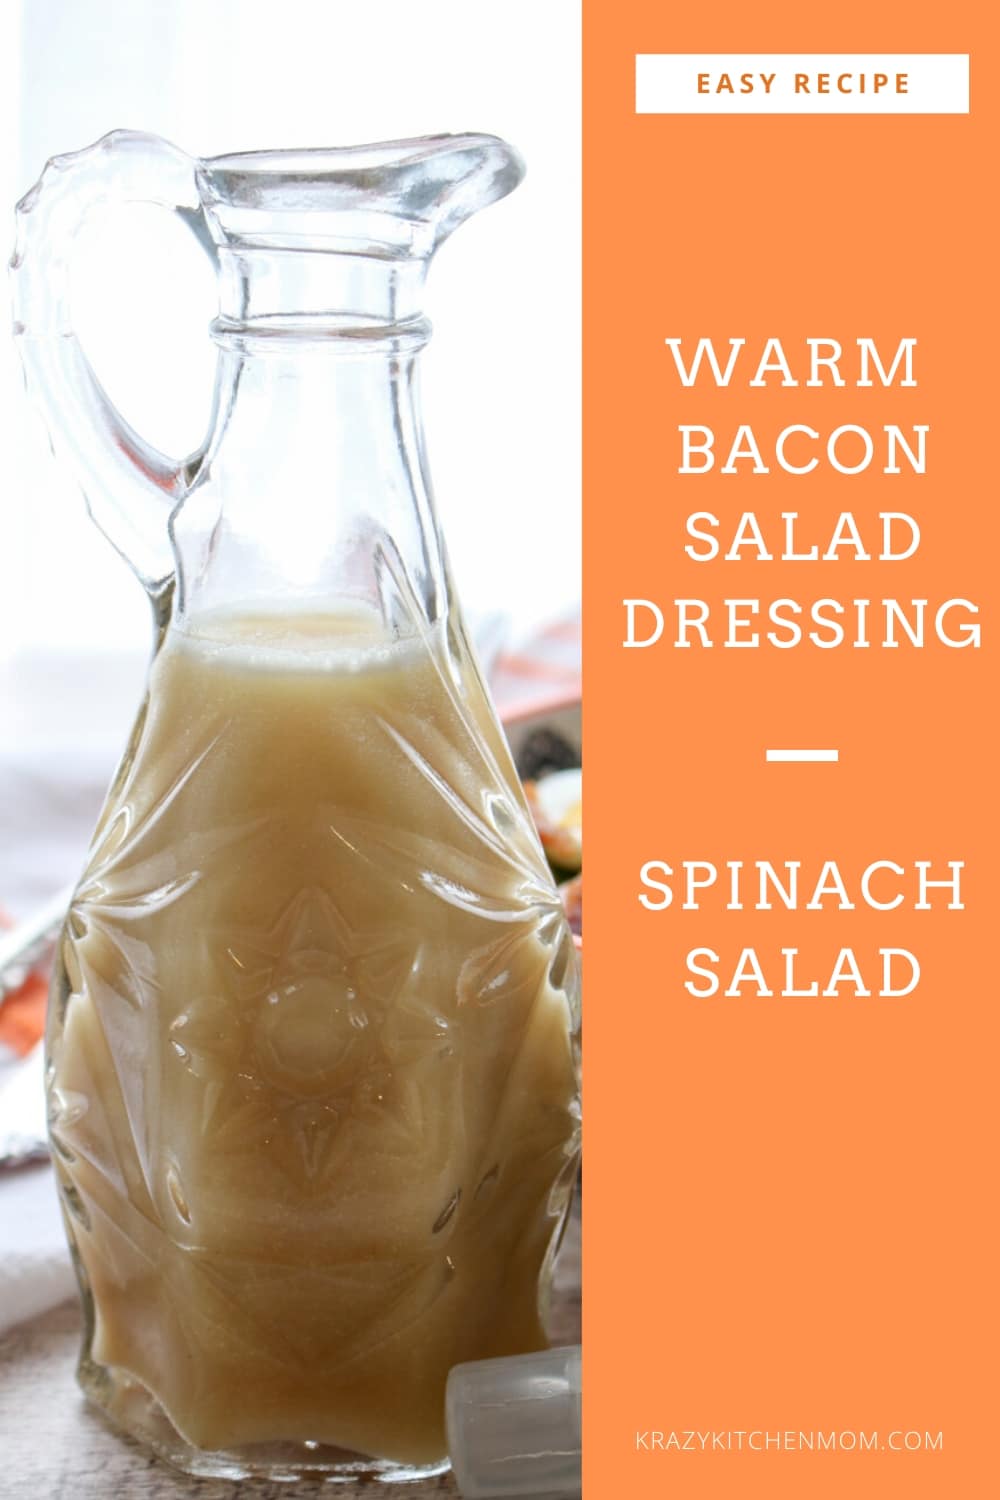 Spinach Salad with Warm Bacon Dressing is a classic salad made with a vinaigrette that uses bacon drippings instead of oil.  via @krazykitchenmom